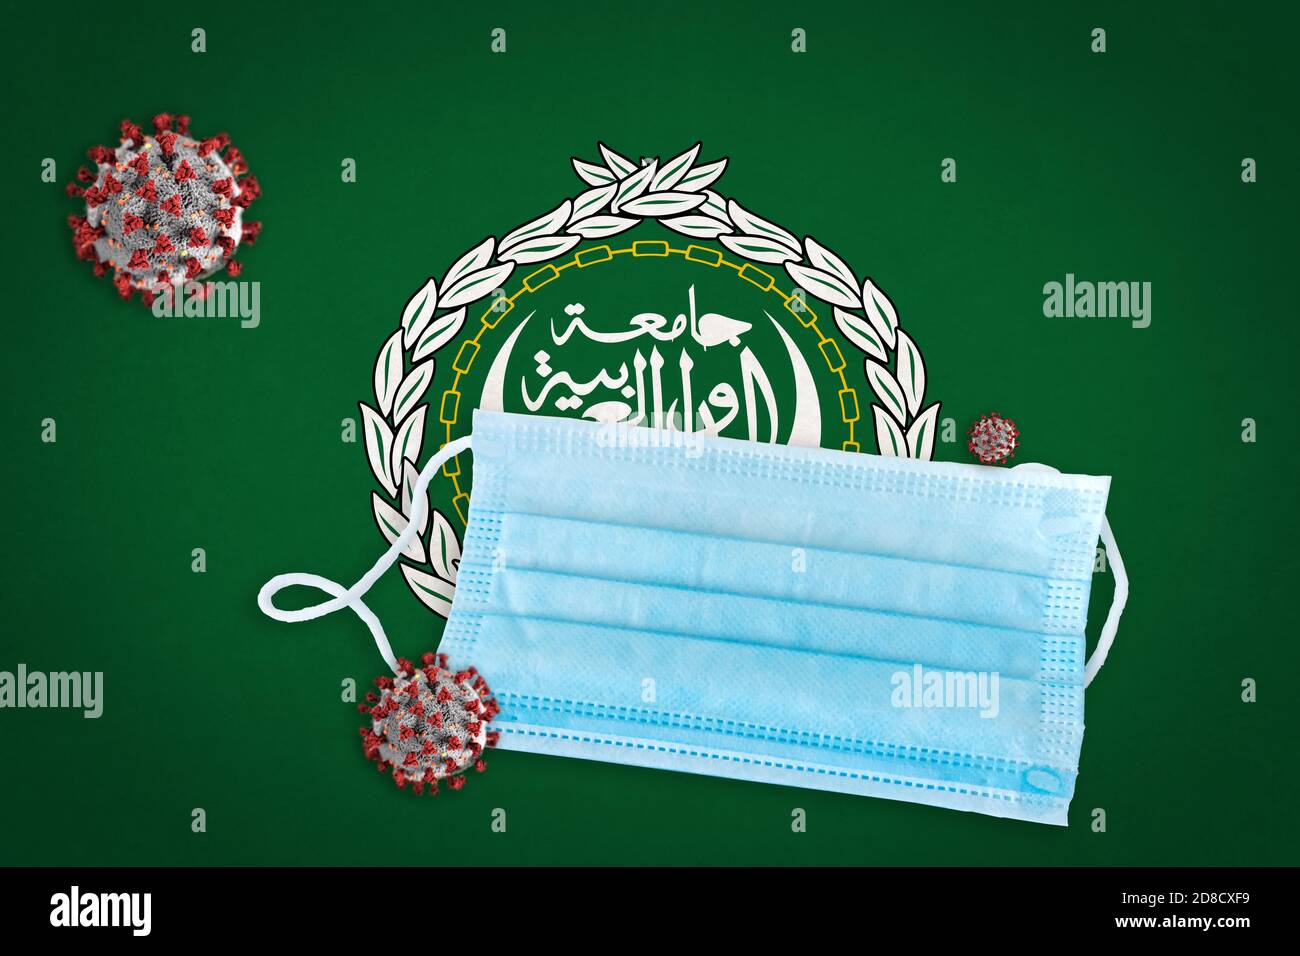 Concept illustration of  surgical face mask over flag of Arab League and Coronavirus or Covid-19 particles in front. Stock Photo